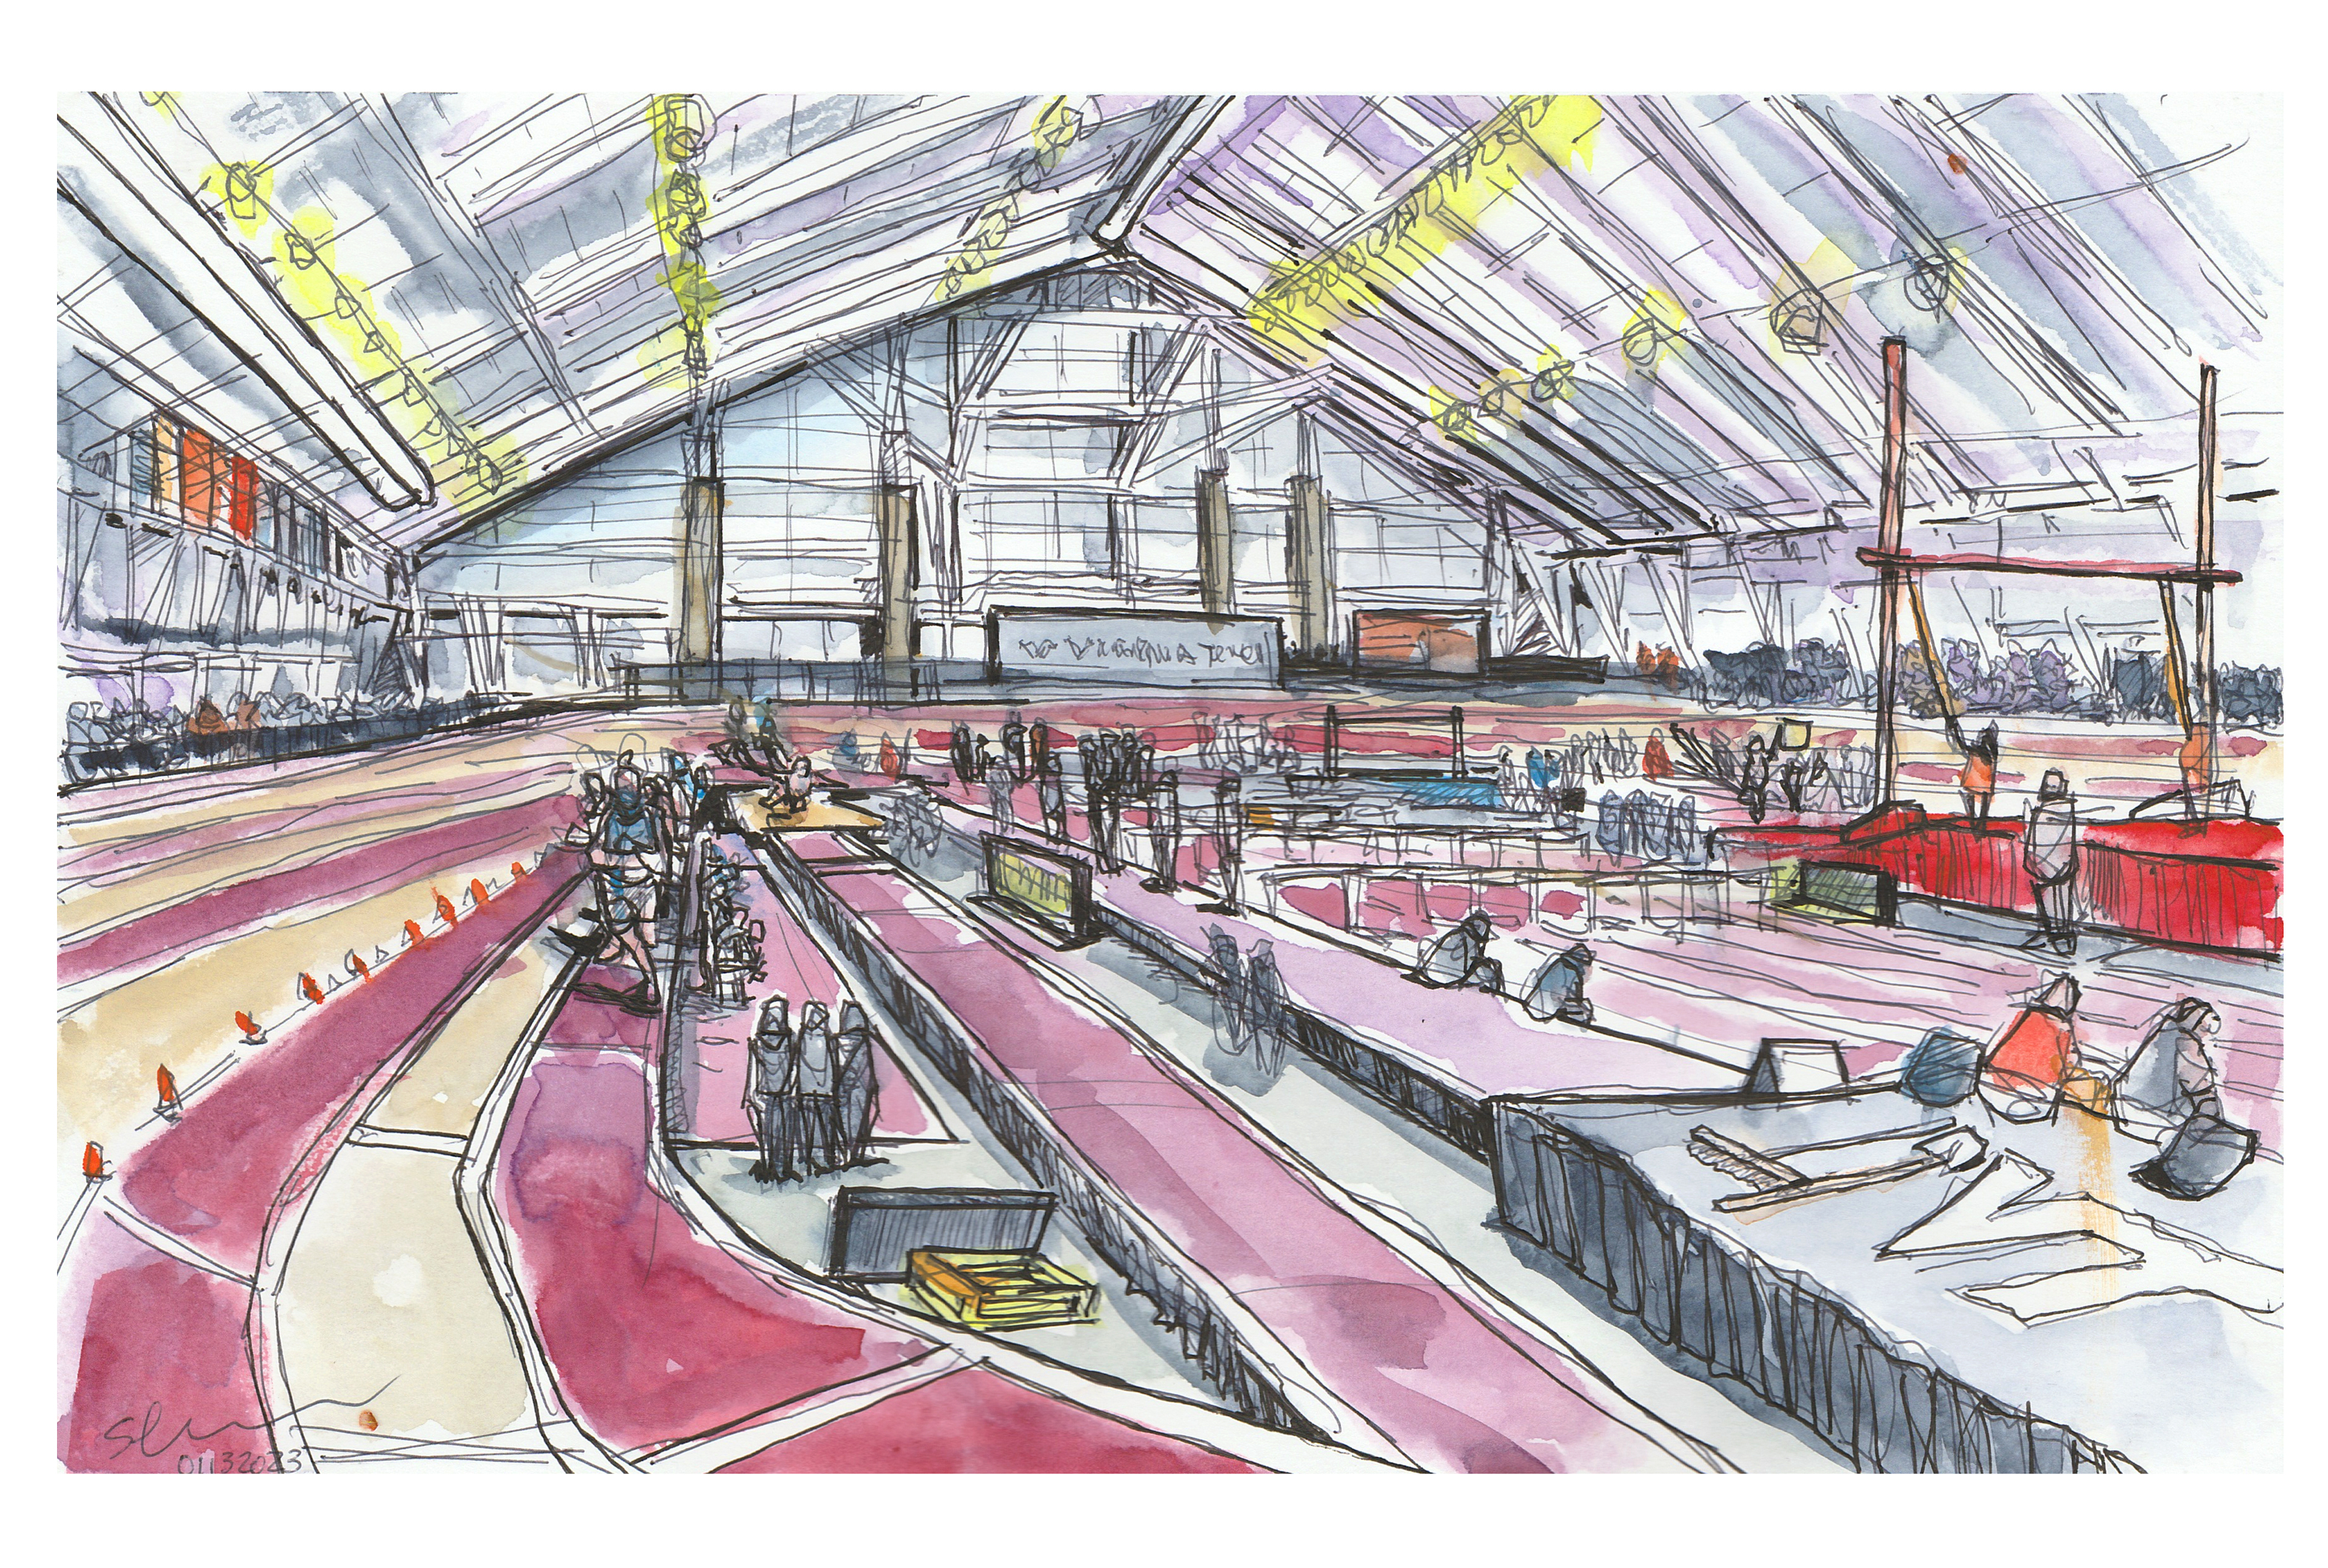 An ink and watercolor sketch of the interior of the Rector Field House during the Virginia Tech Invitational Track Meet